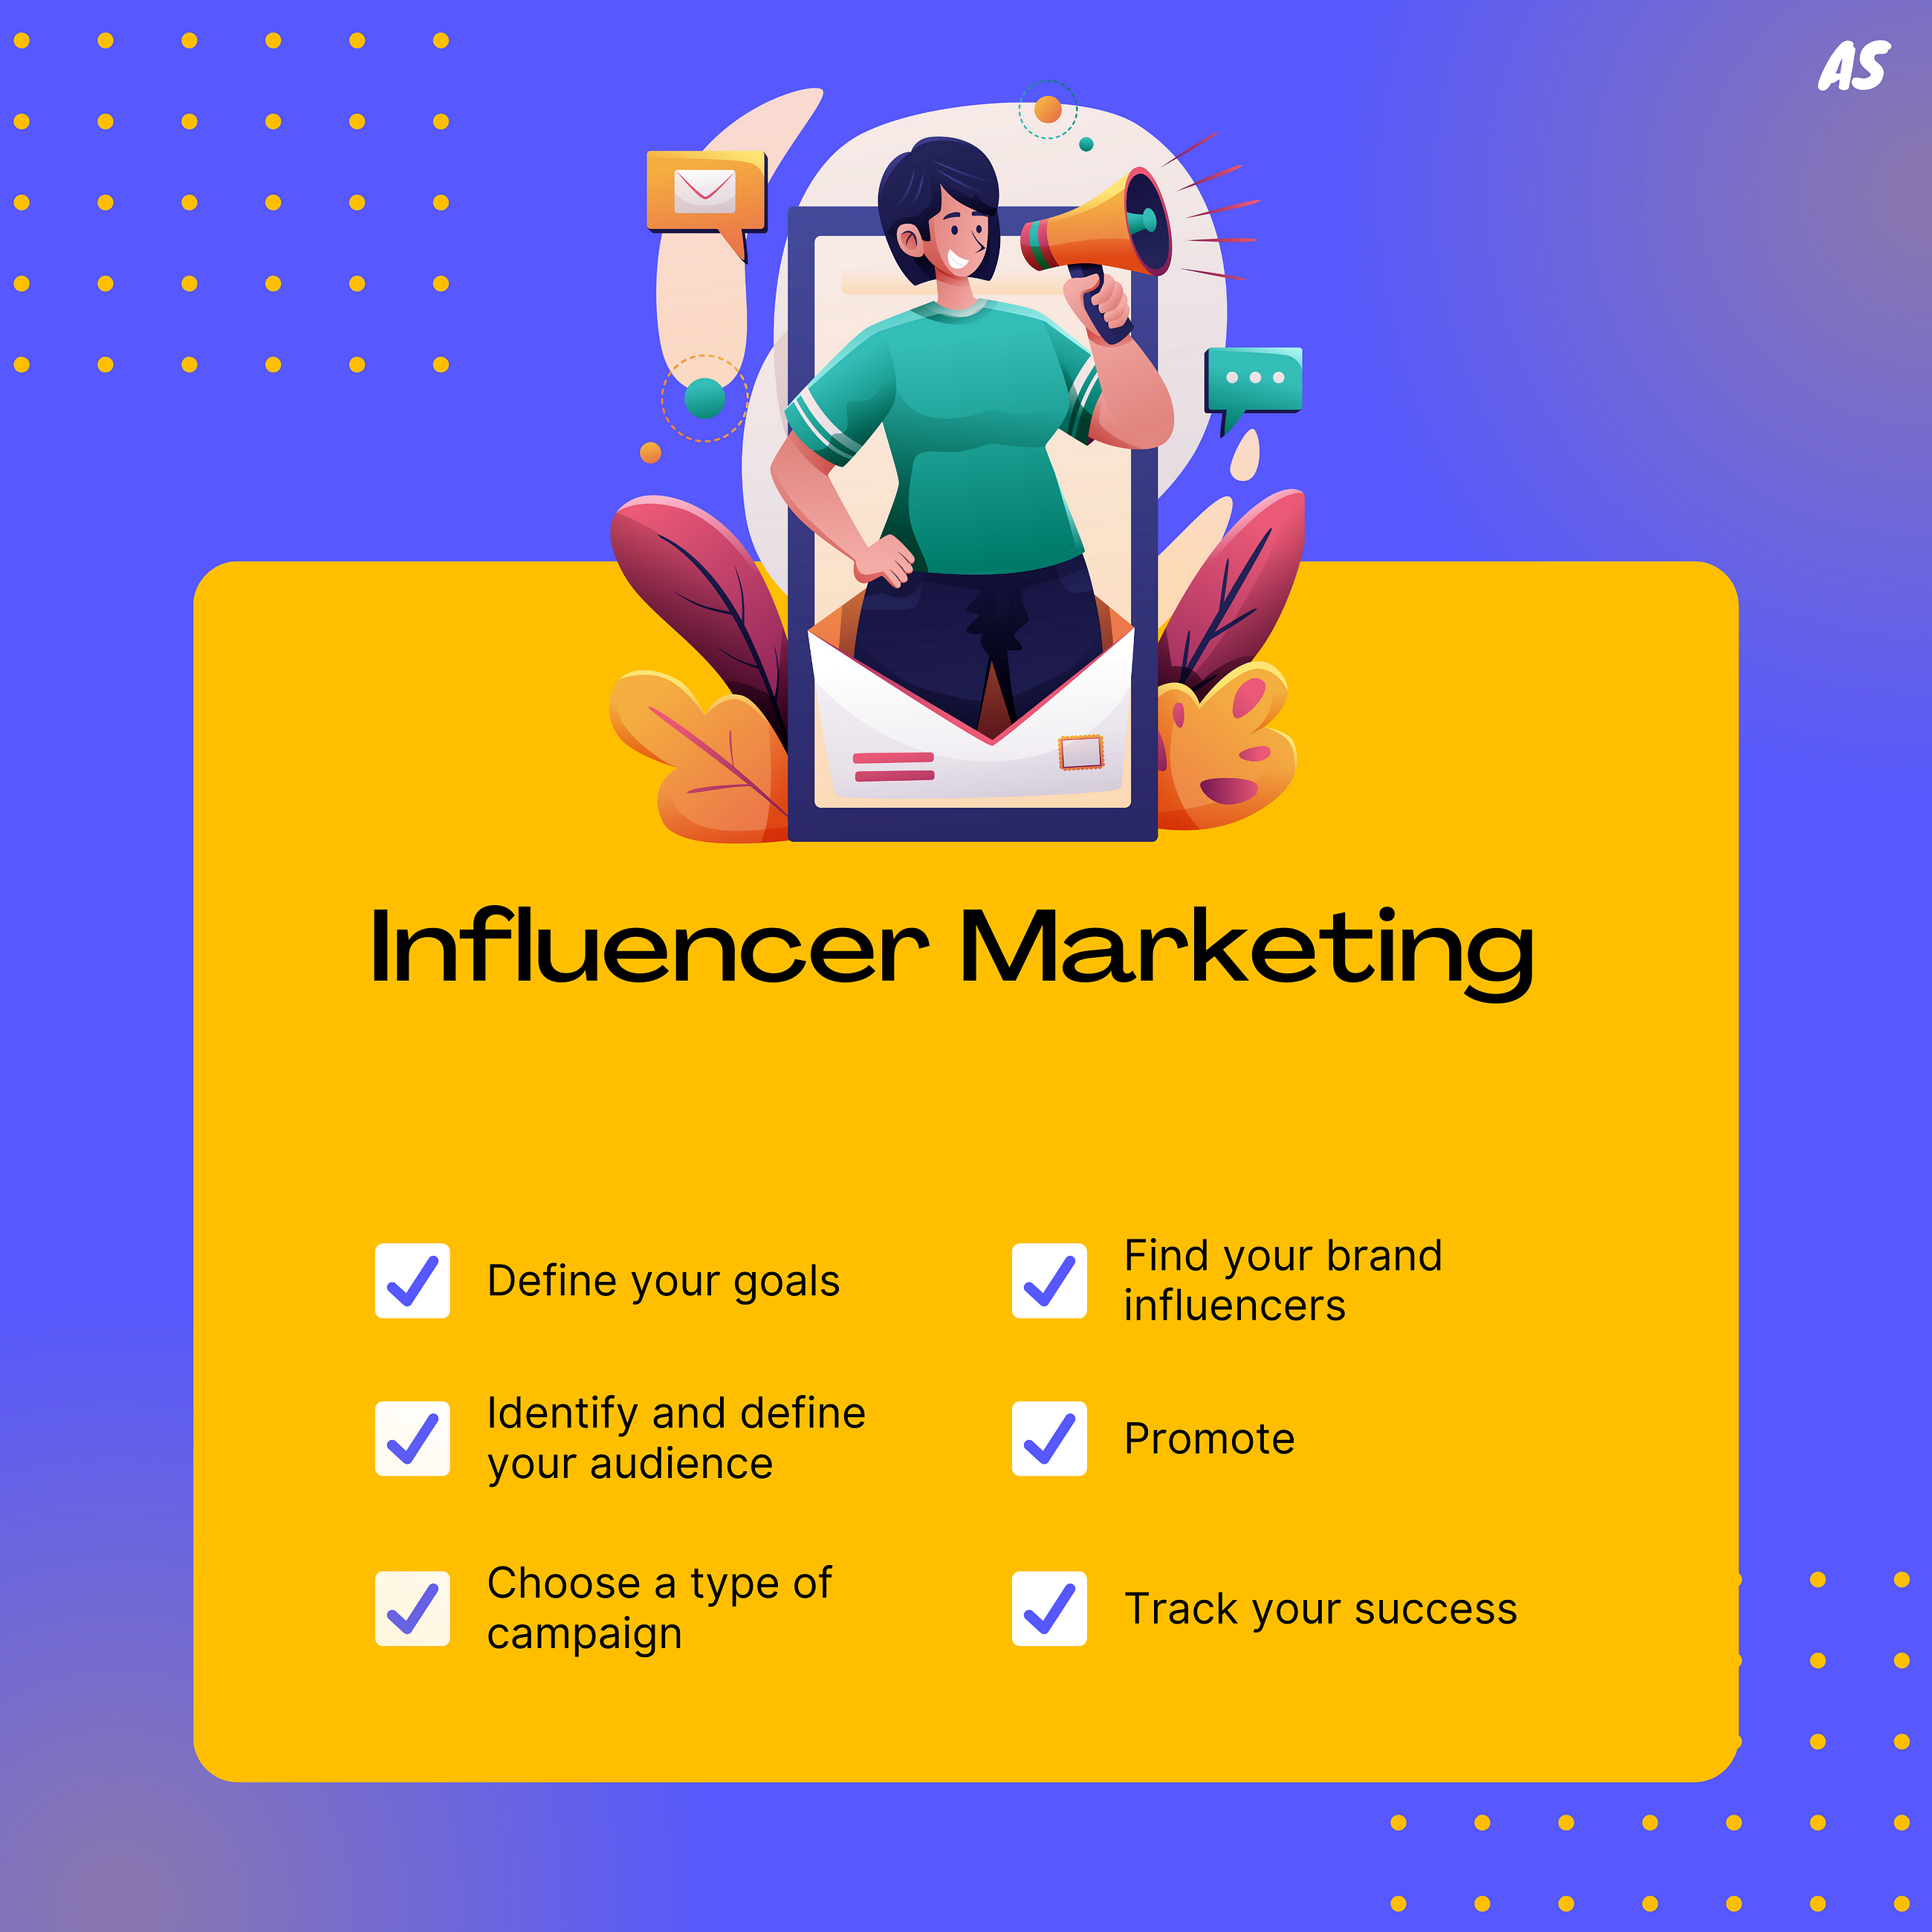 Influencer marketing has been a buzzword for a while, but does it work?